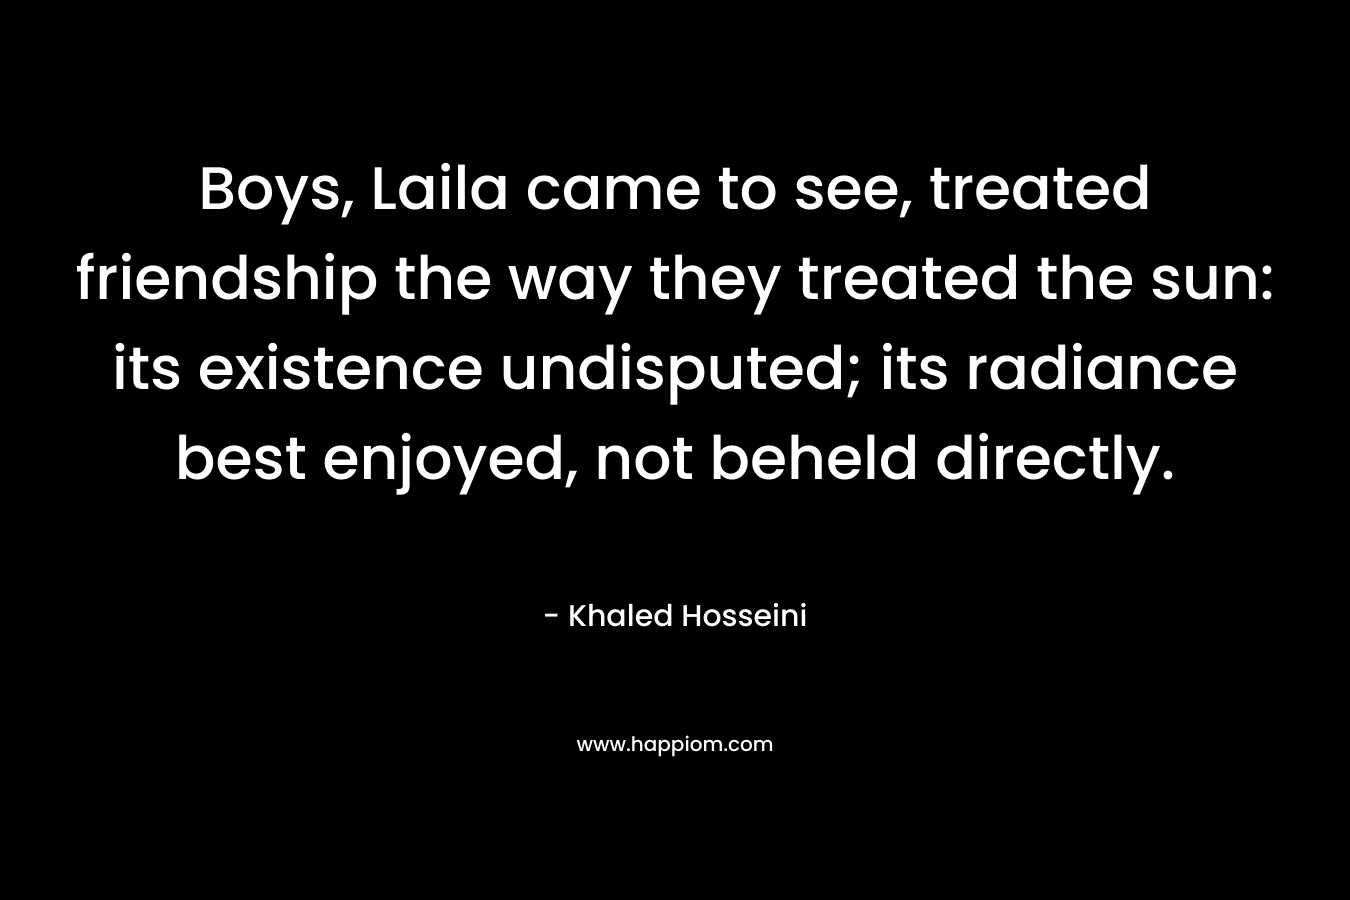 Boys, Laila came to see, treated friendship the way they treated the sun: its existence undisputed; its radiance best enjoyed, not beheld directly. – Khaled Hosseini